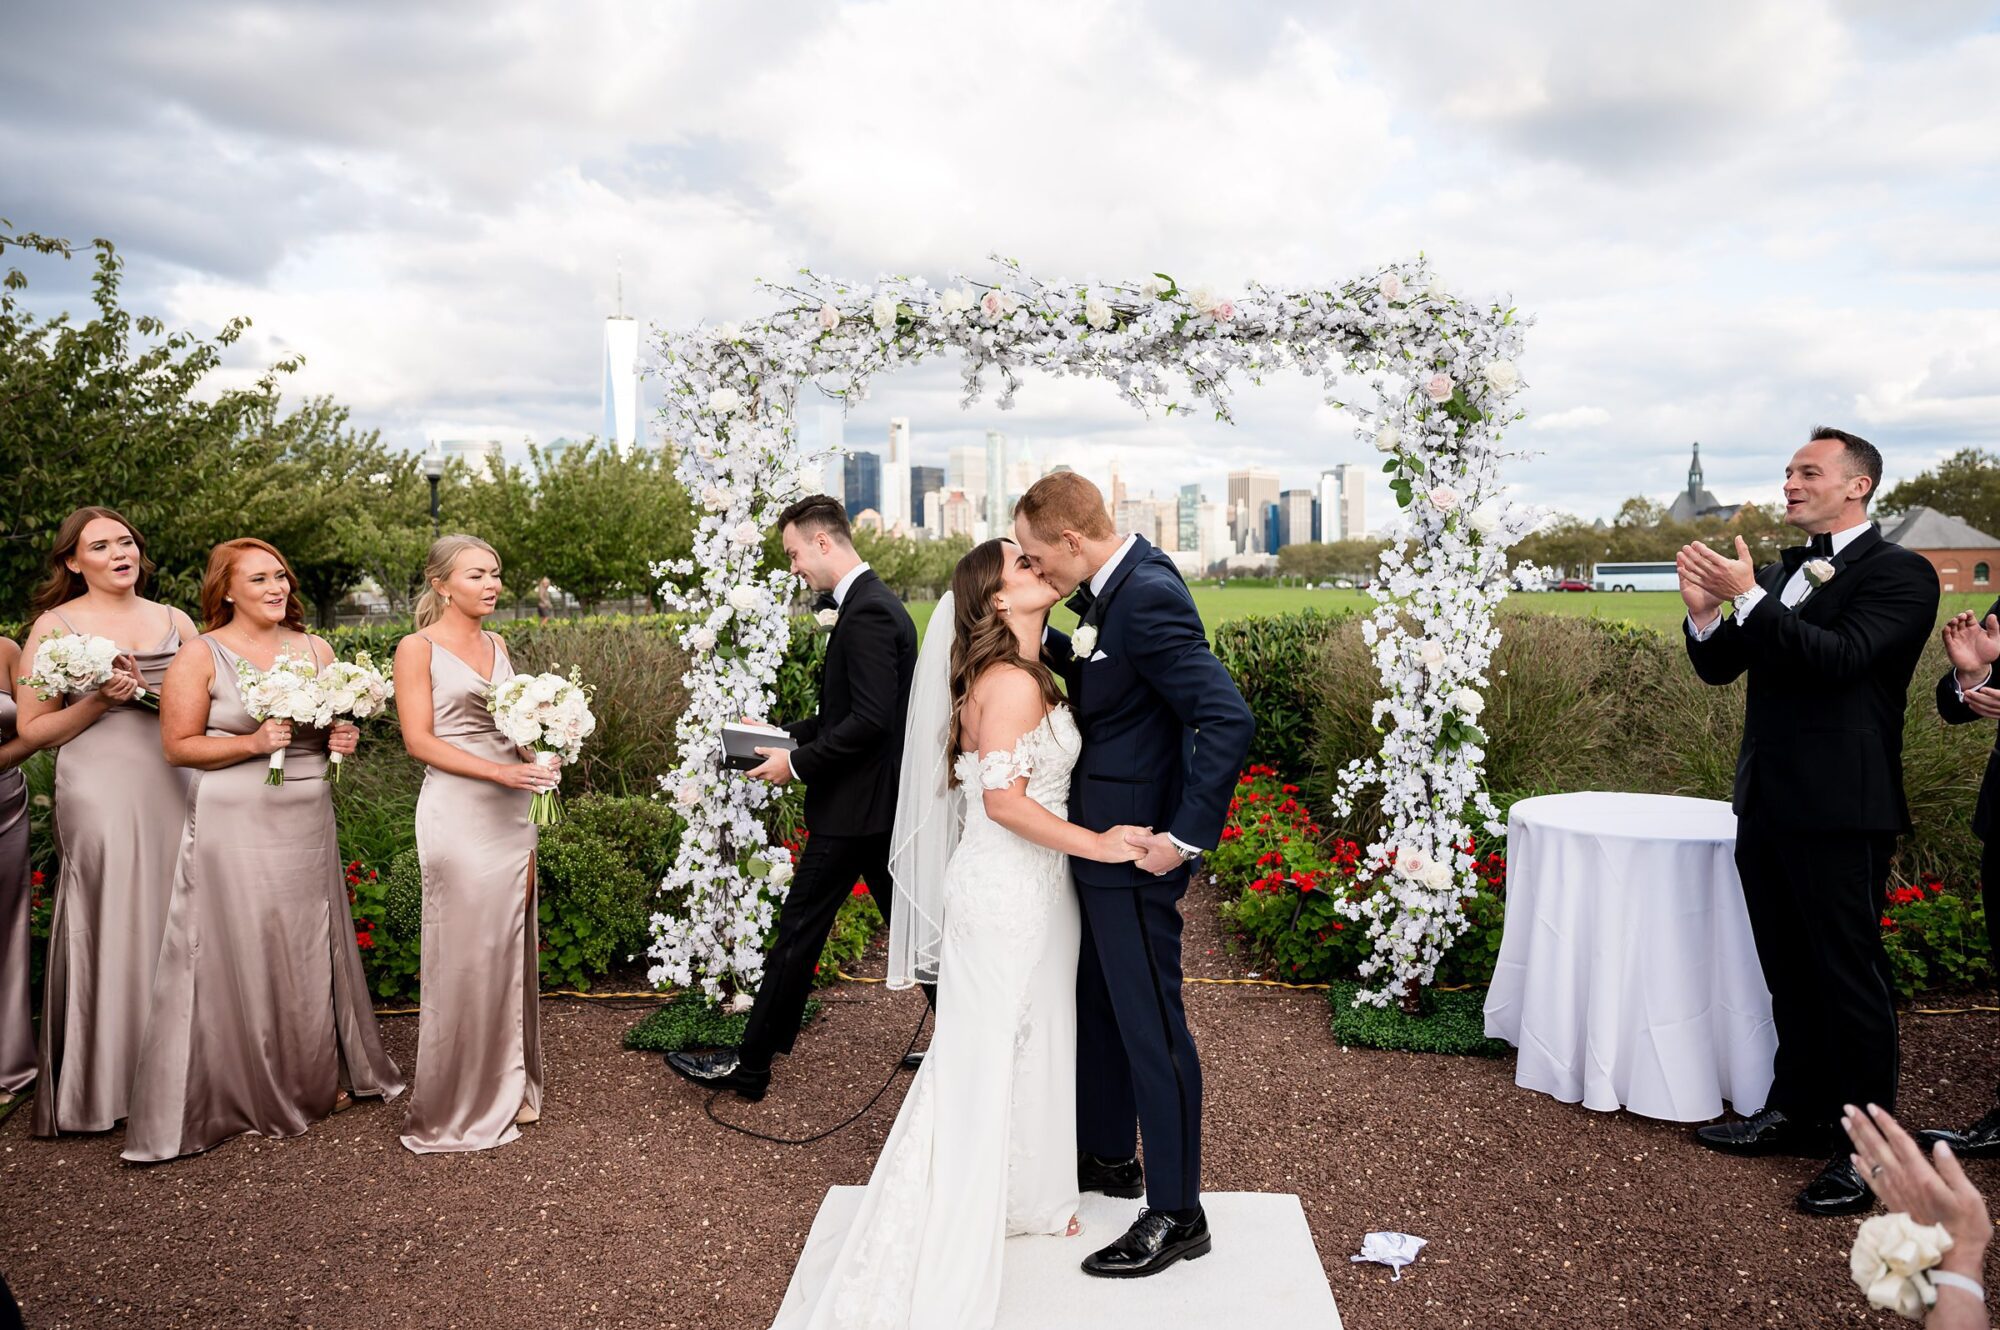 A bride and groom kissing under an arch in front of a city skyline.